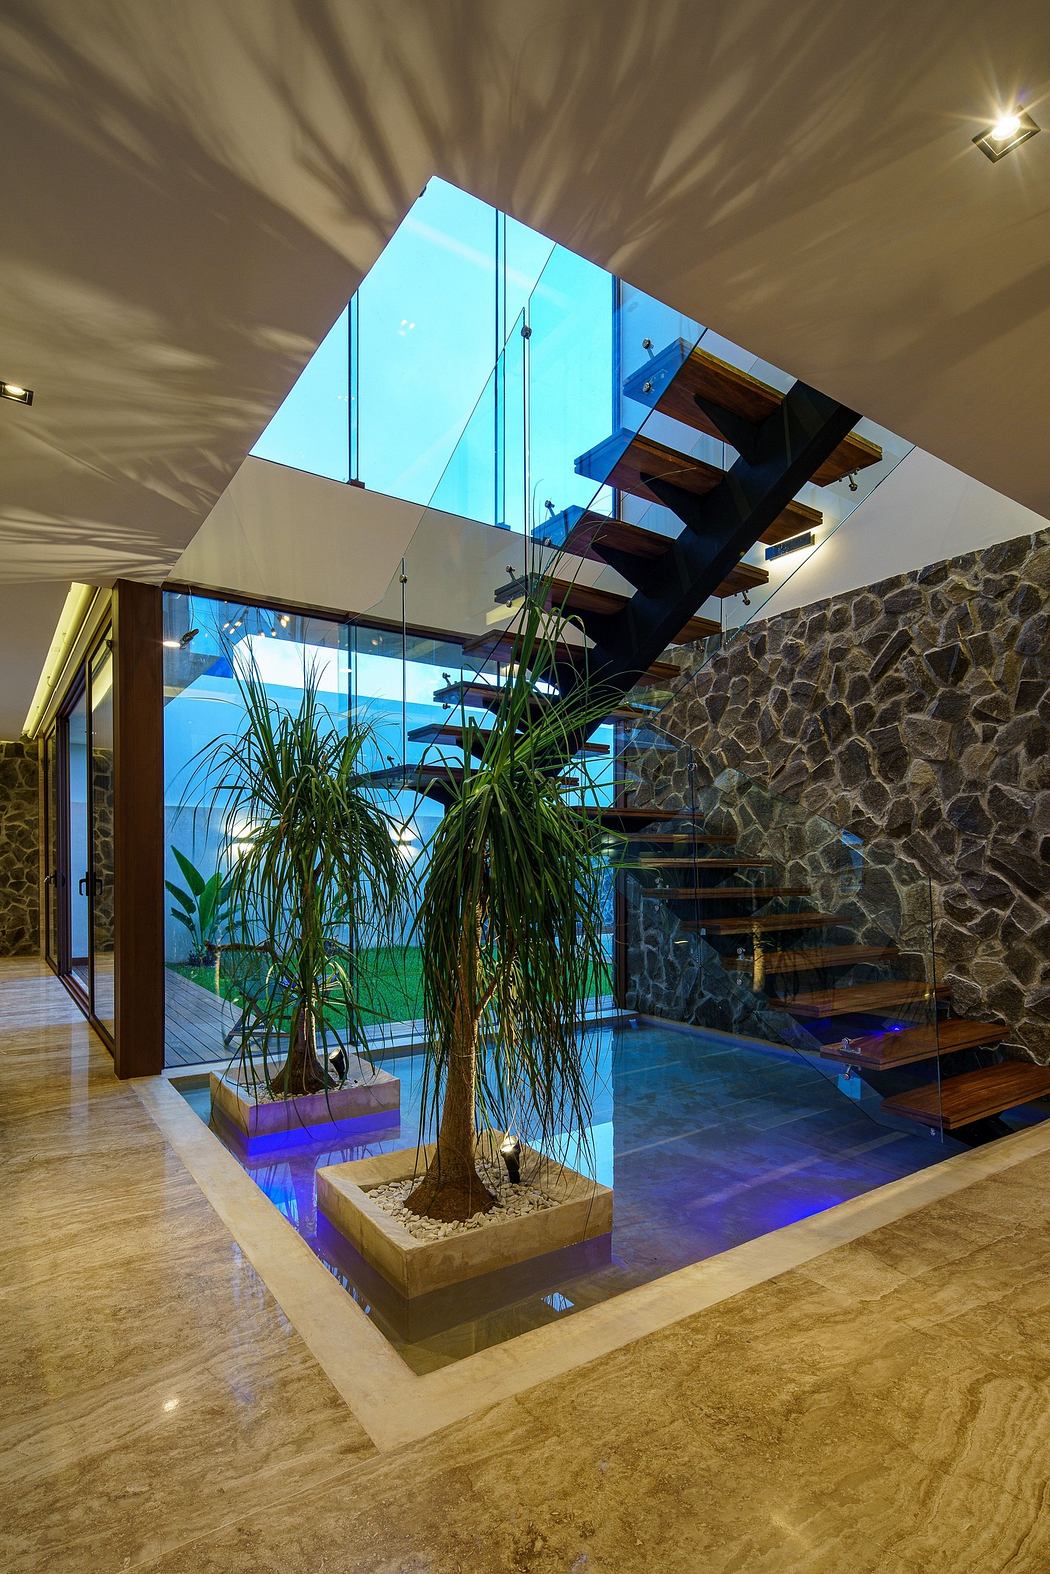 Modern interior with glass staircase, stone wall, and indoor plants.